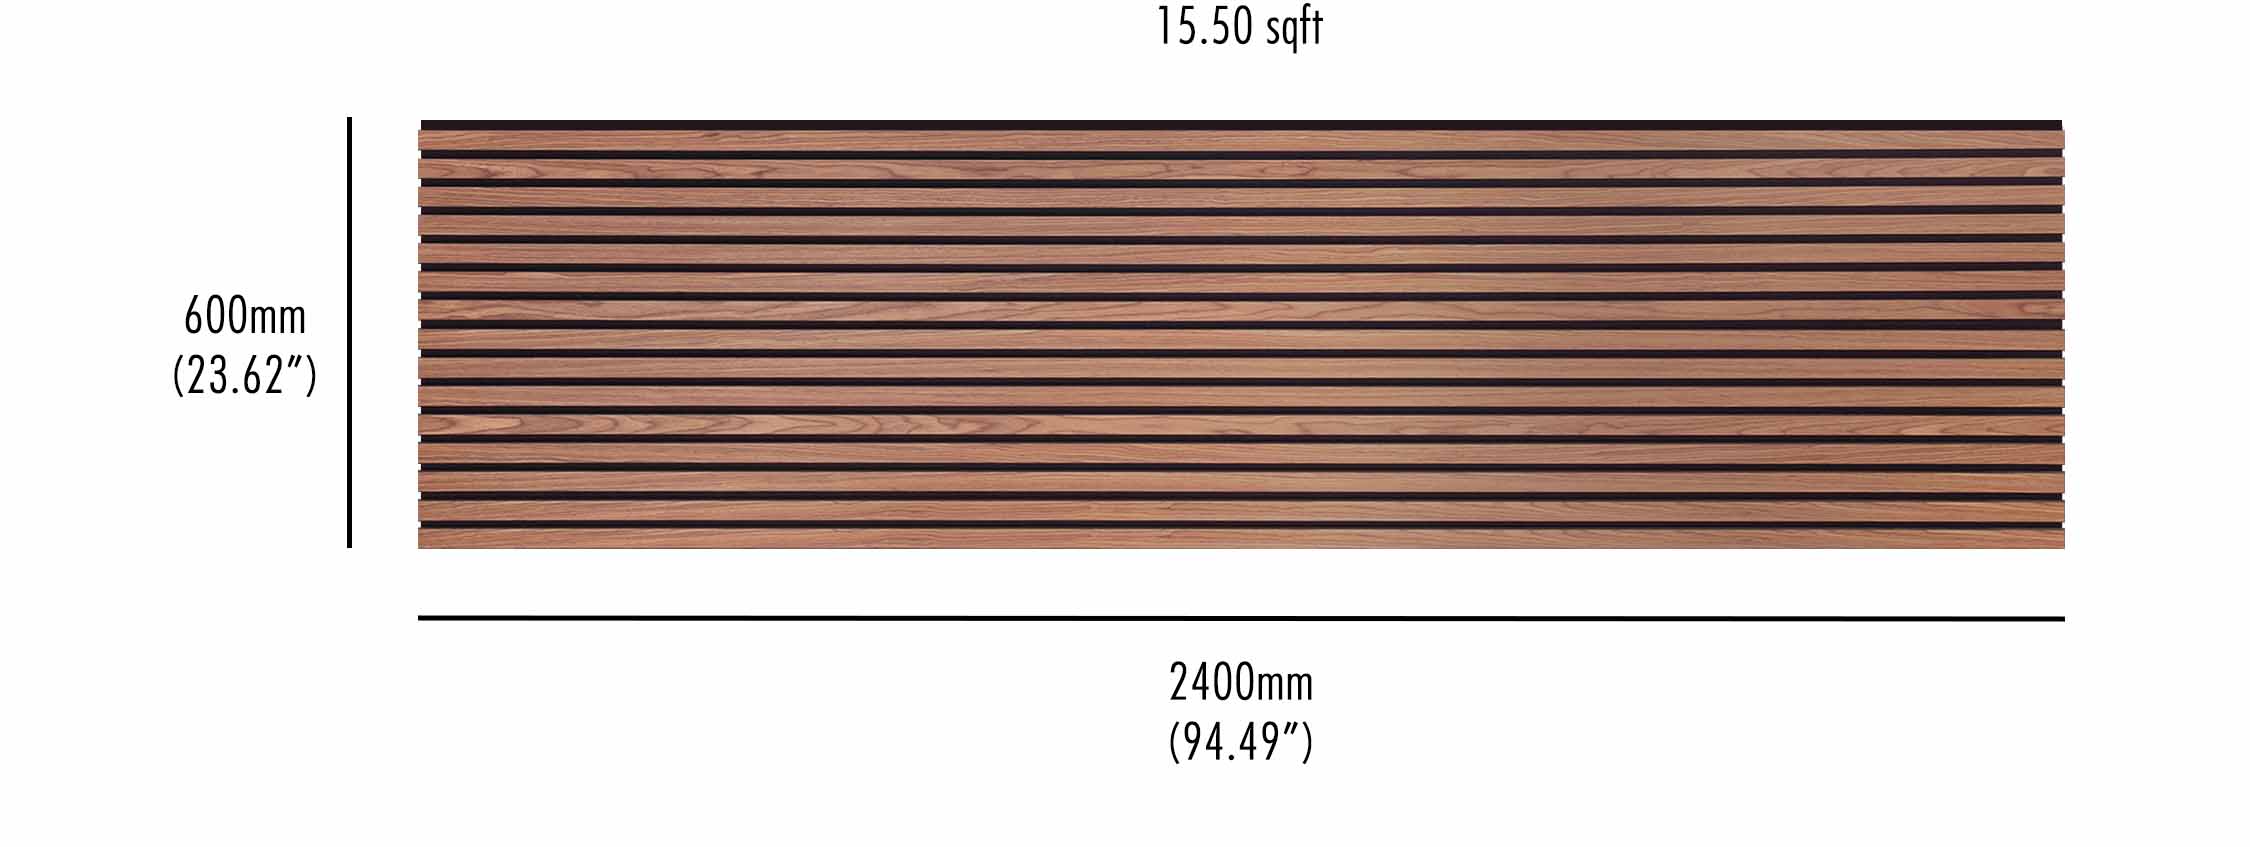 A horizontal walnut size diagram displaying panels measuring 600mm in height and 2400mm in width, covering a total area of 15.50 sqft.